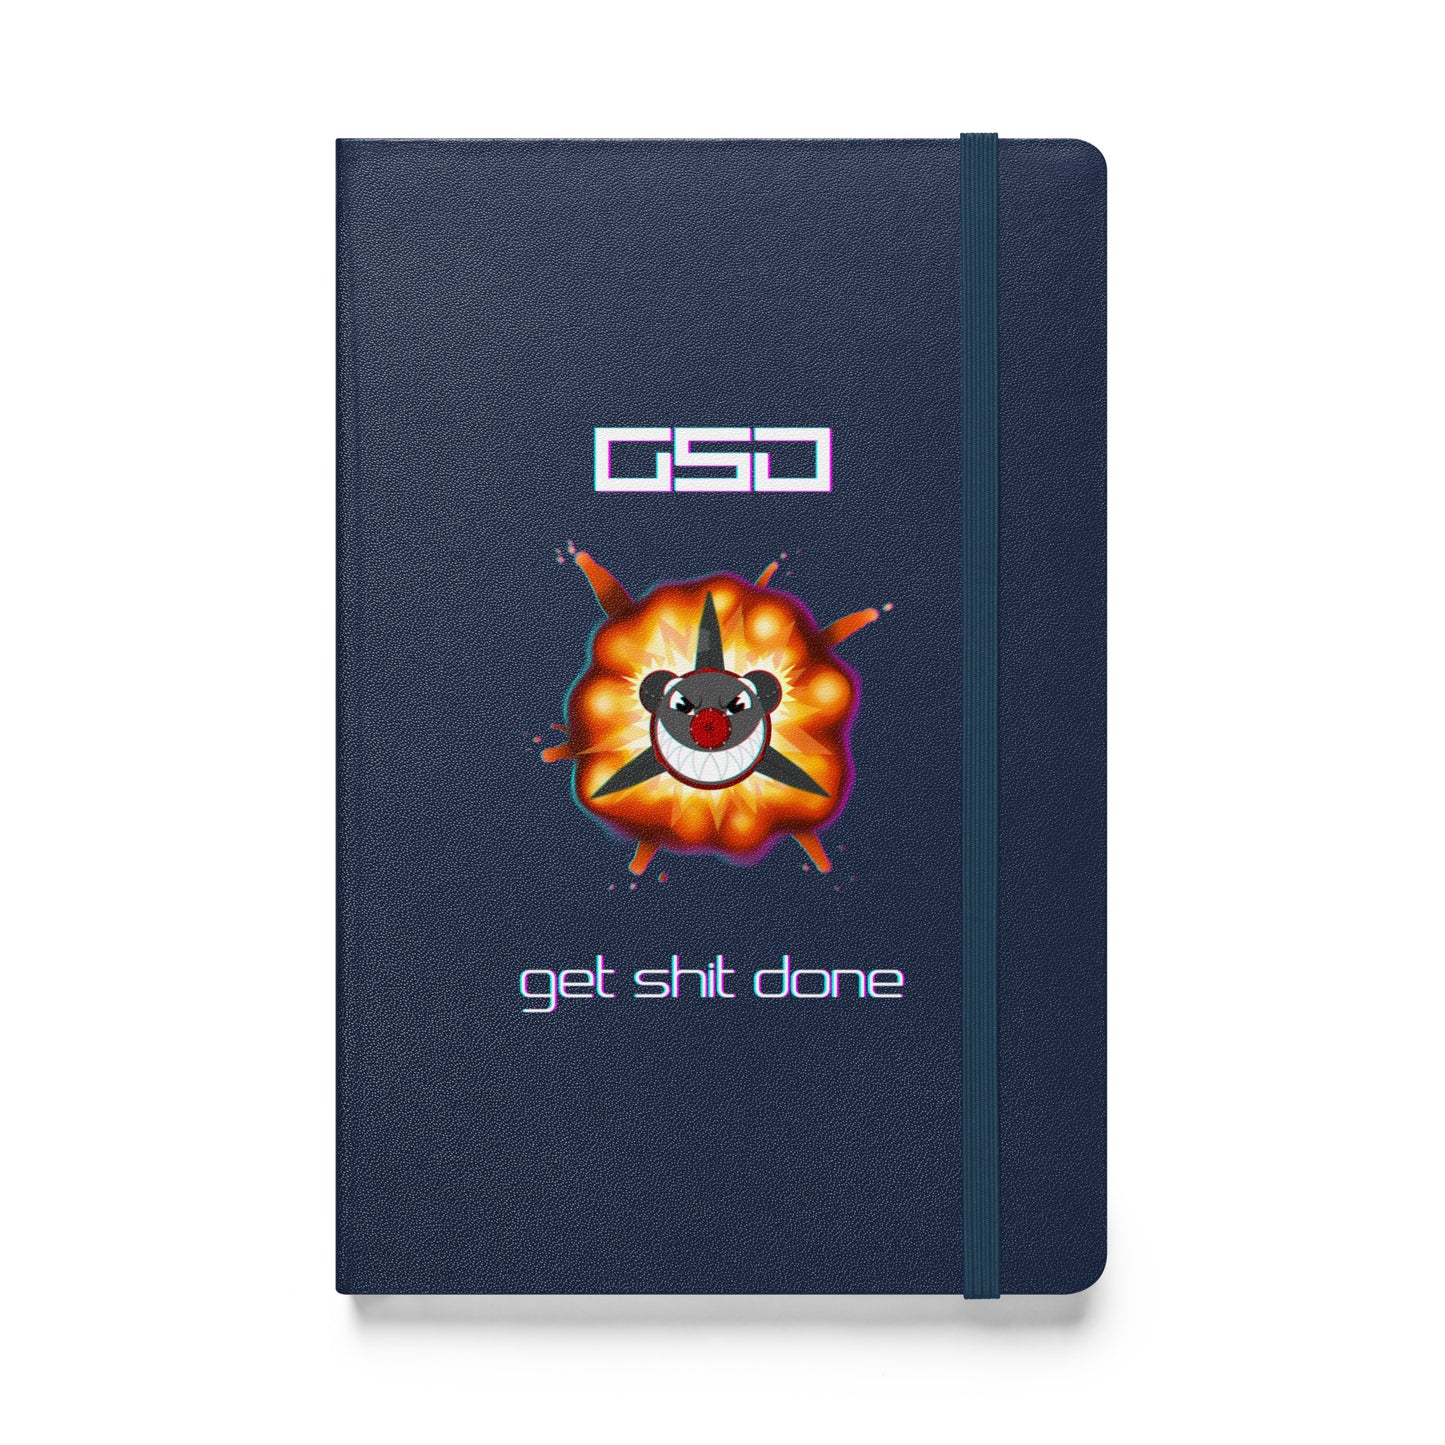 Rocket -Classic GSD- Hardcover bound notebook